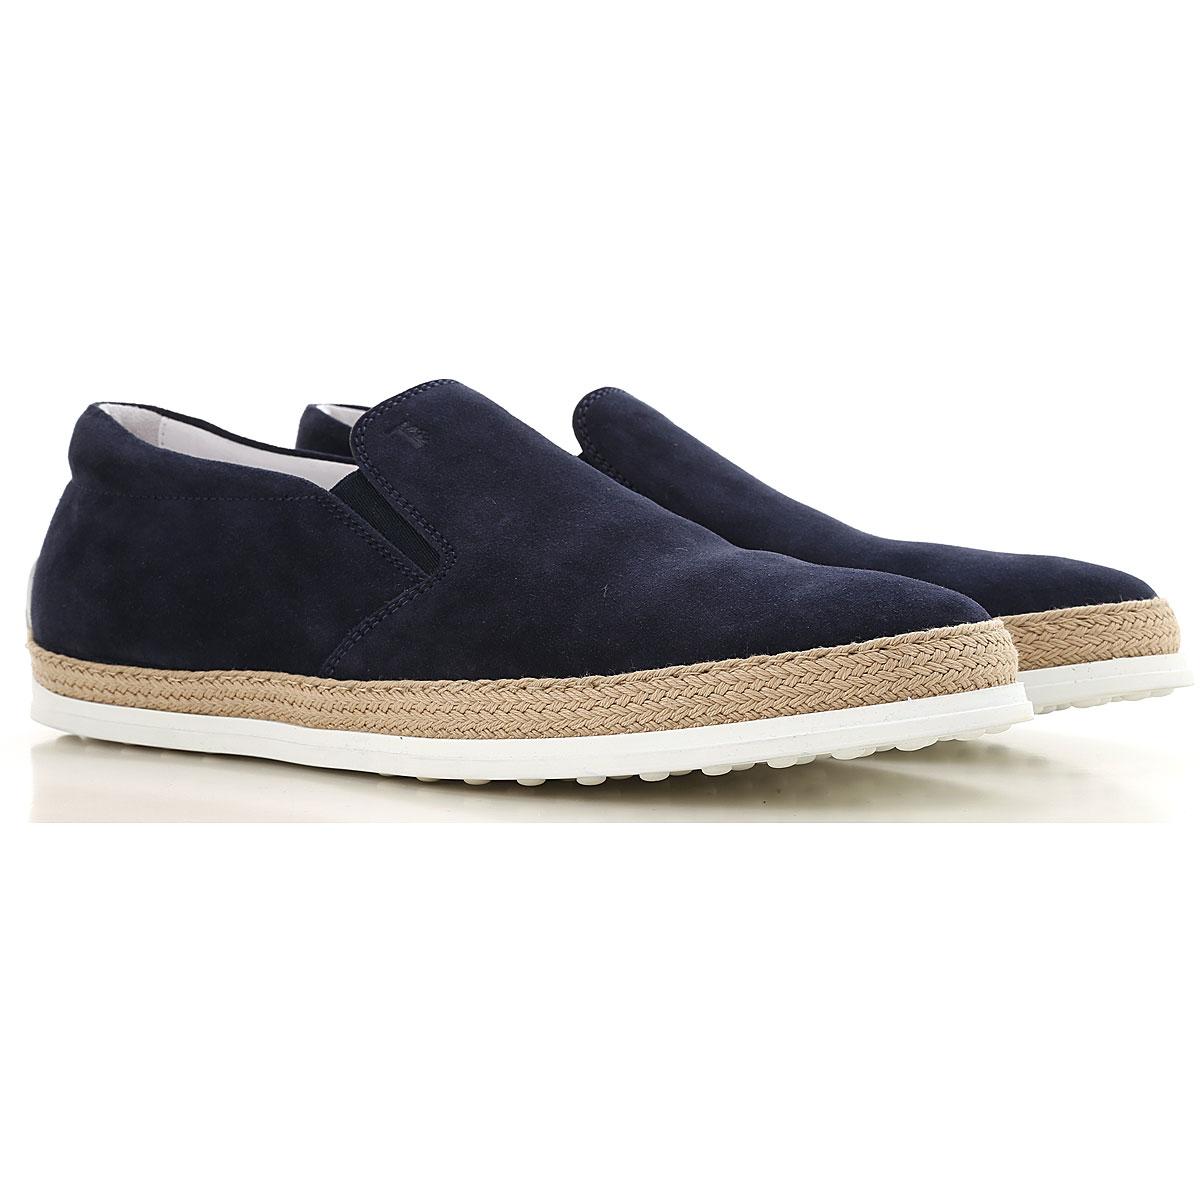 Tod's Suede Slip On Sneakers in Blue for Men - Lyst